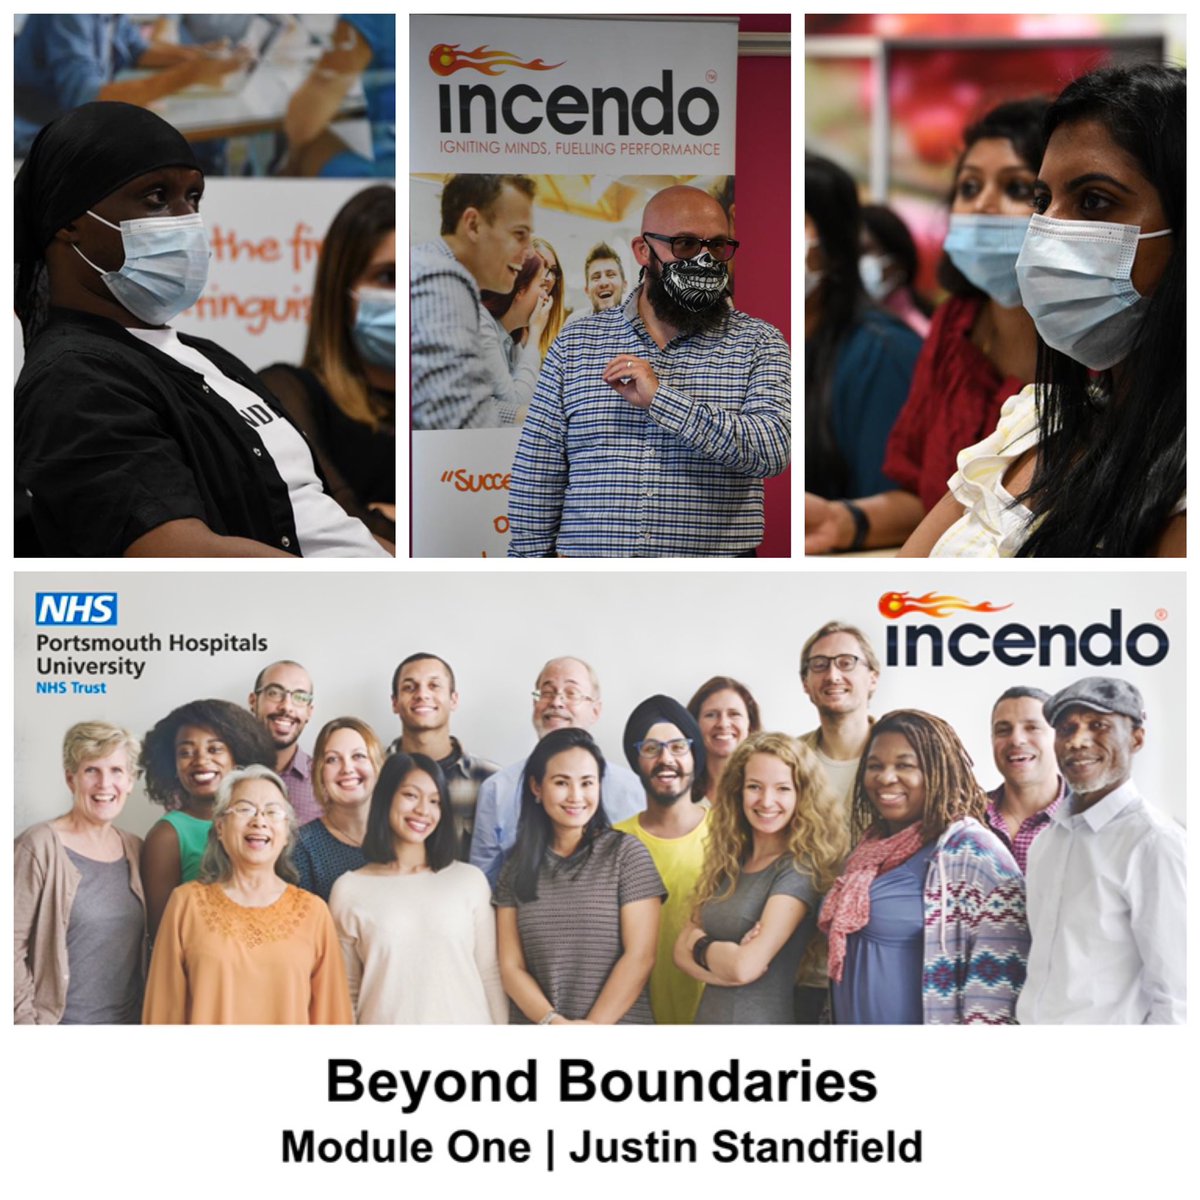 It was a privilege to launch the 2022 cohort of the Beyond Boundaries programme for @PHU_NHS today.⠀ ⠀ Thank you to everyone who joined us today; looking forward to facilitating future modules and supporting your development over the next 6 months. ⠀ #BAME #diversity #equality